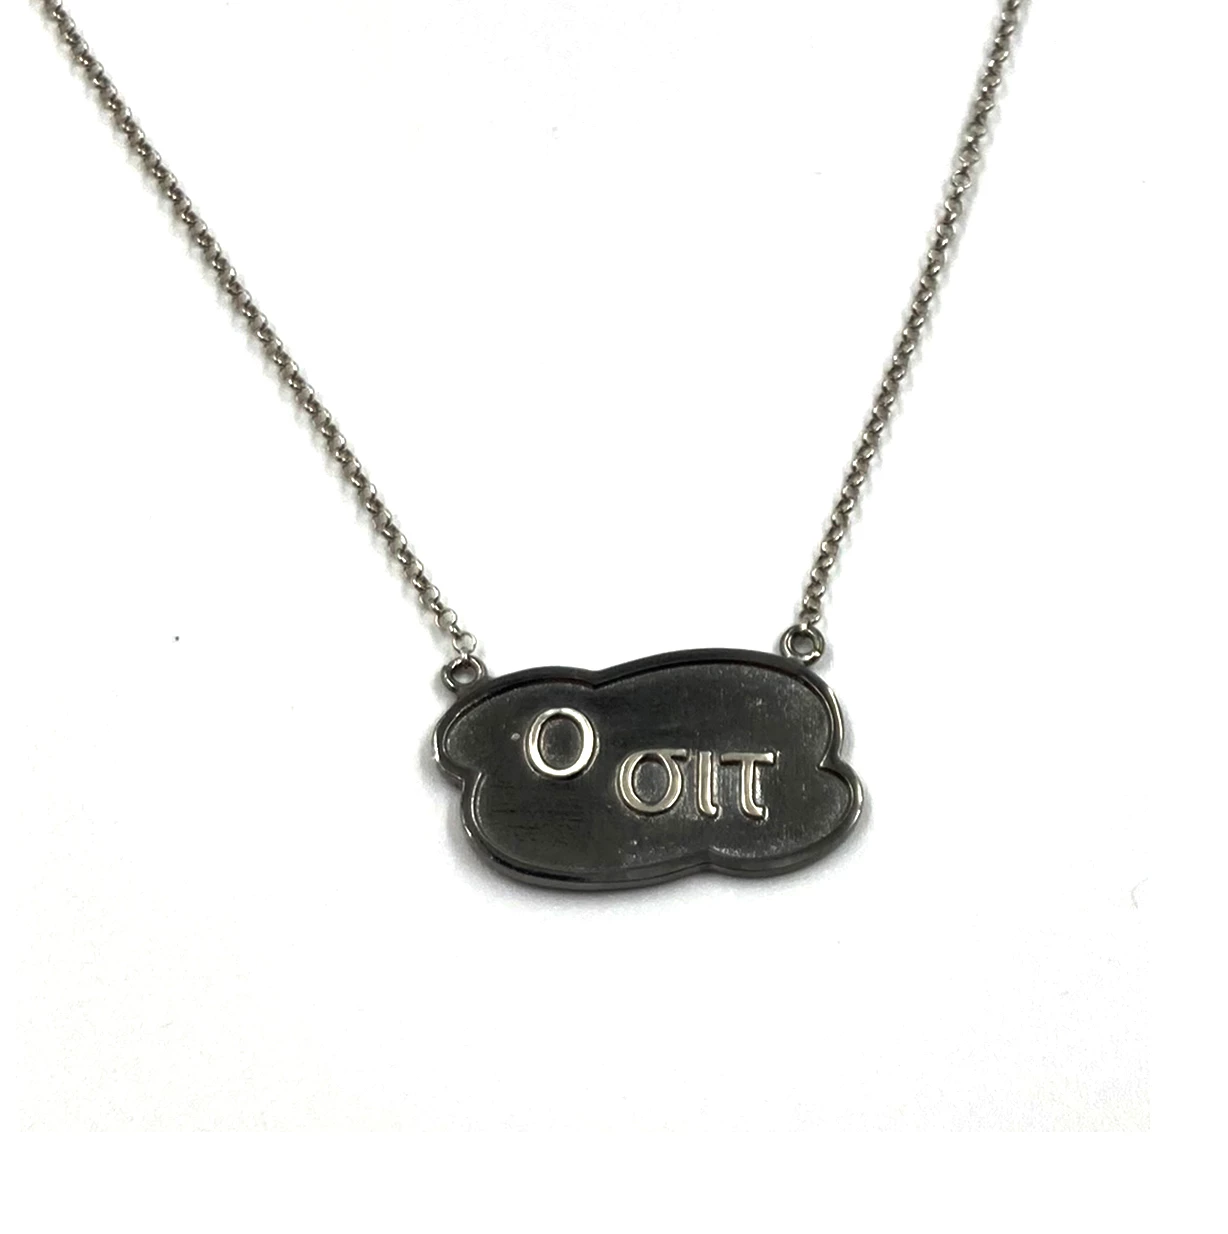 Necklace, "O sit"